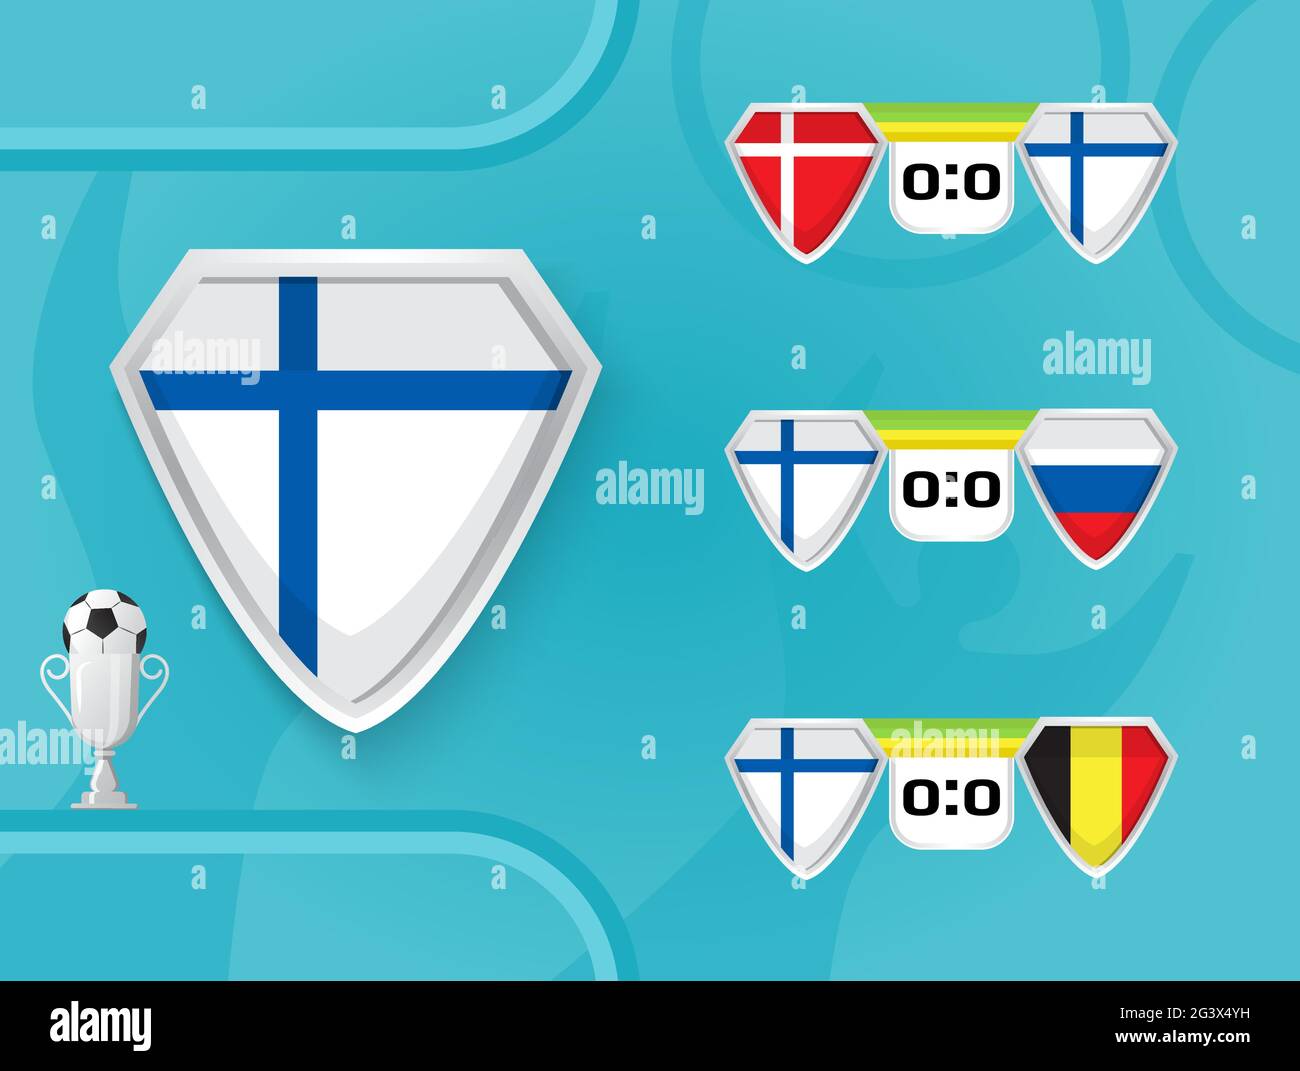 Schedule of national football team of Finland matches in the European Championship 2020. Shields with the flag of Denmark, Finland, Belgium, Russia. Stock Vector